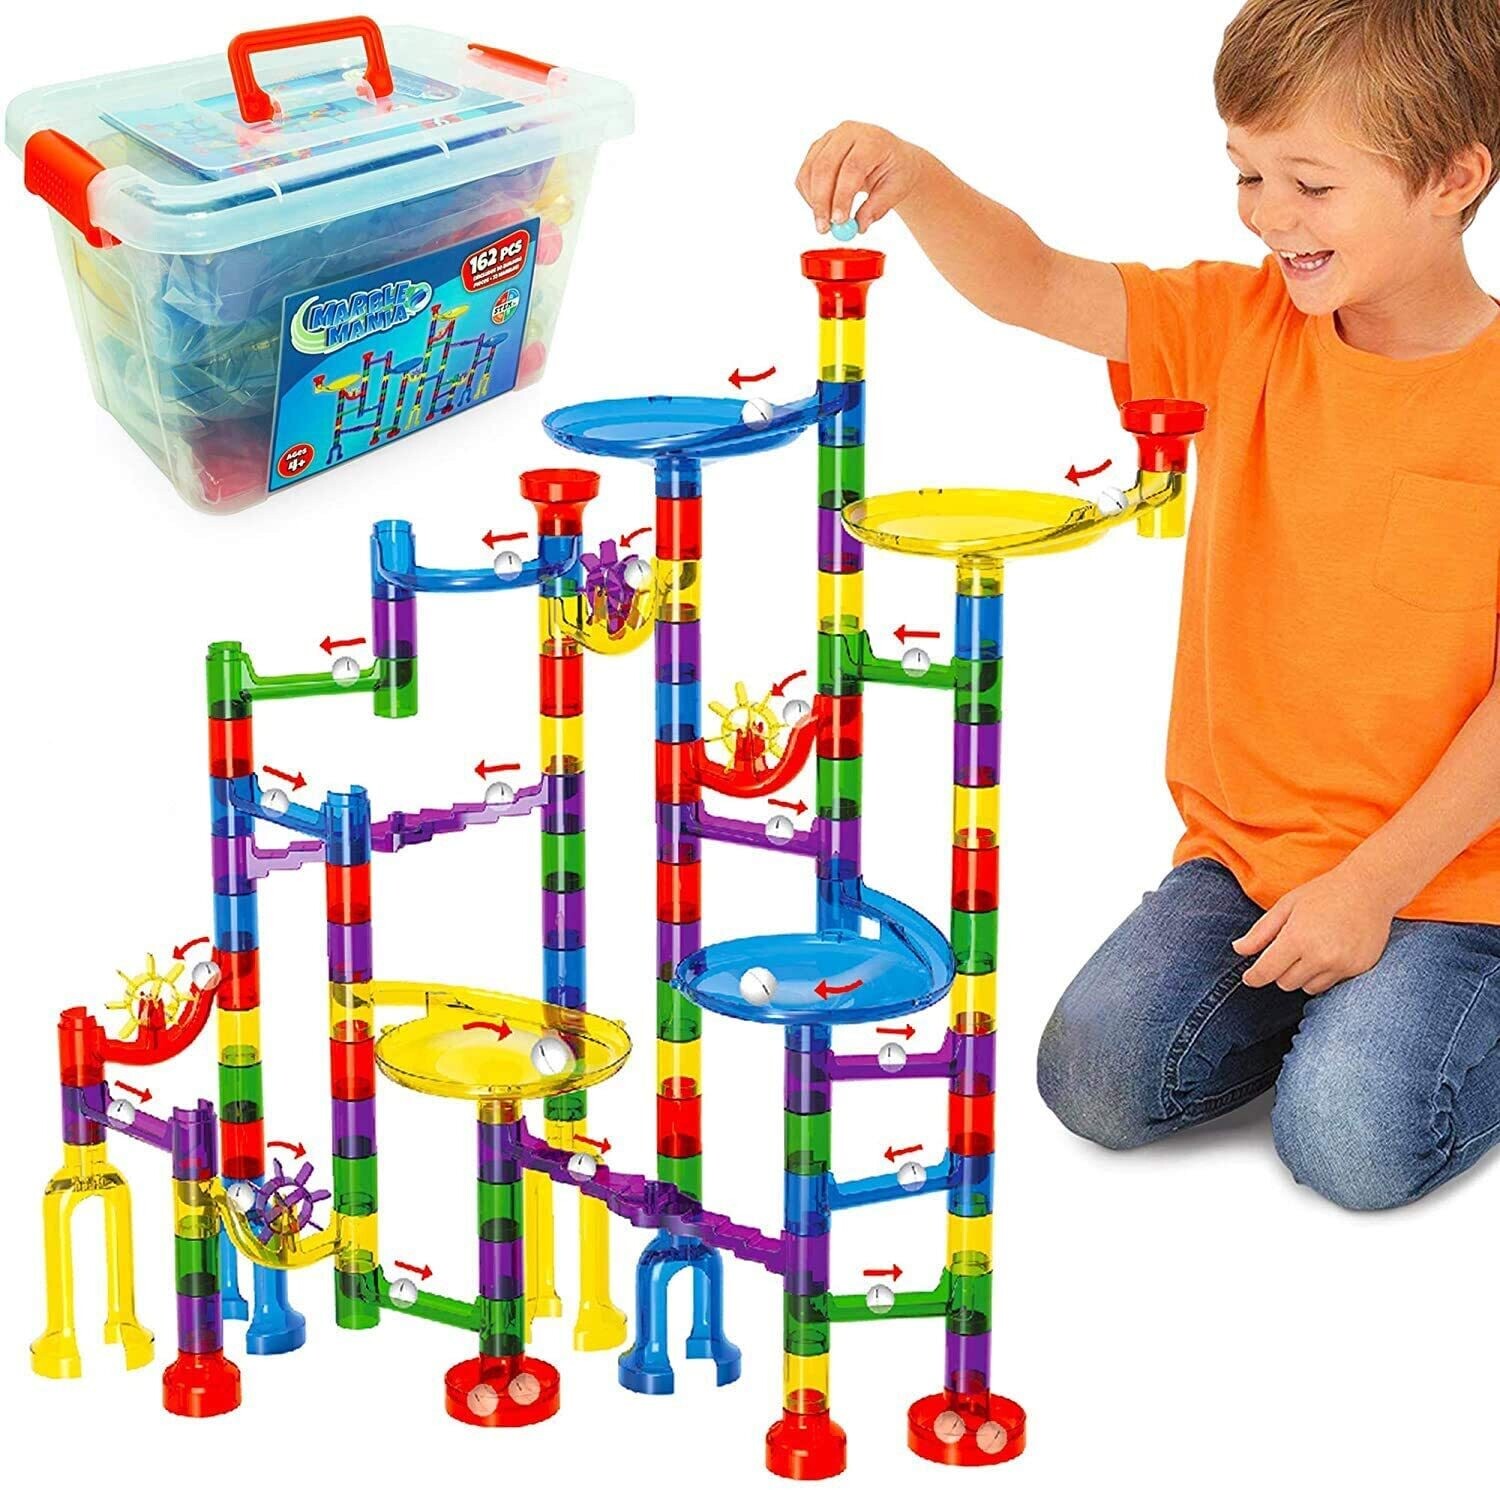 Construction Toys For 4-8 Year Old Boys or Girls